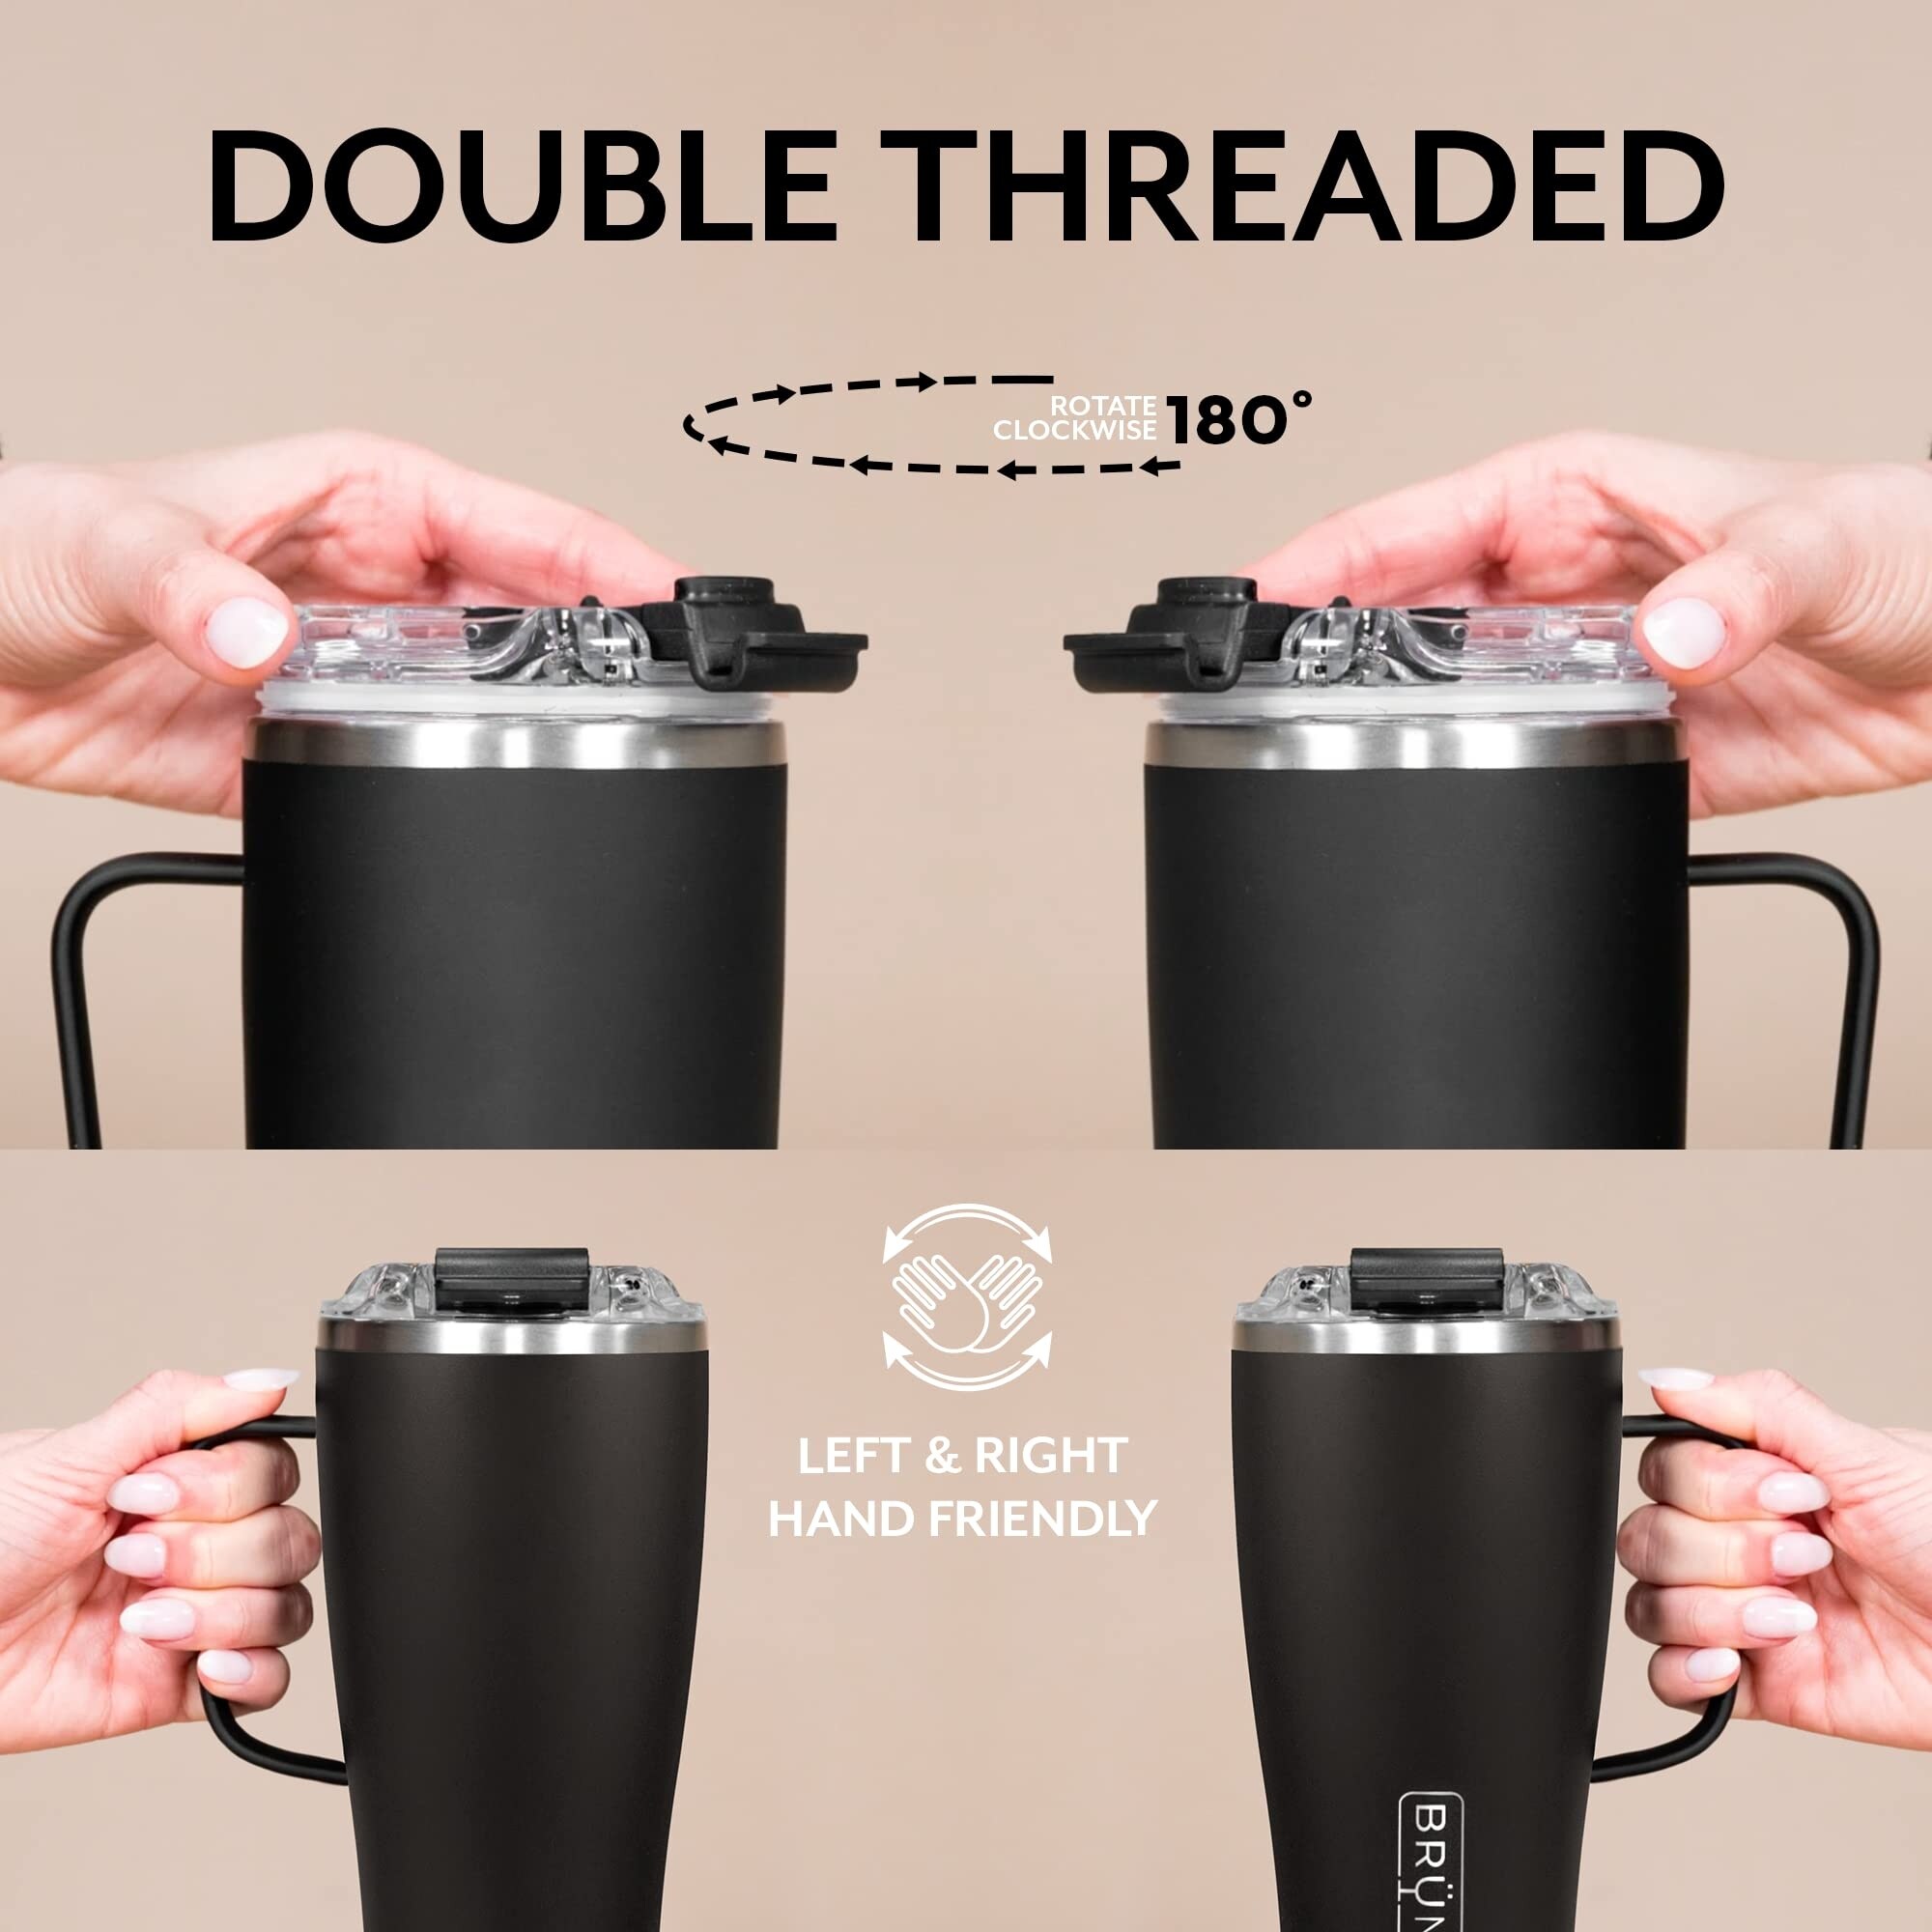 New 32oz Toddy XL Leakproof Insulated Mug 